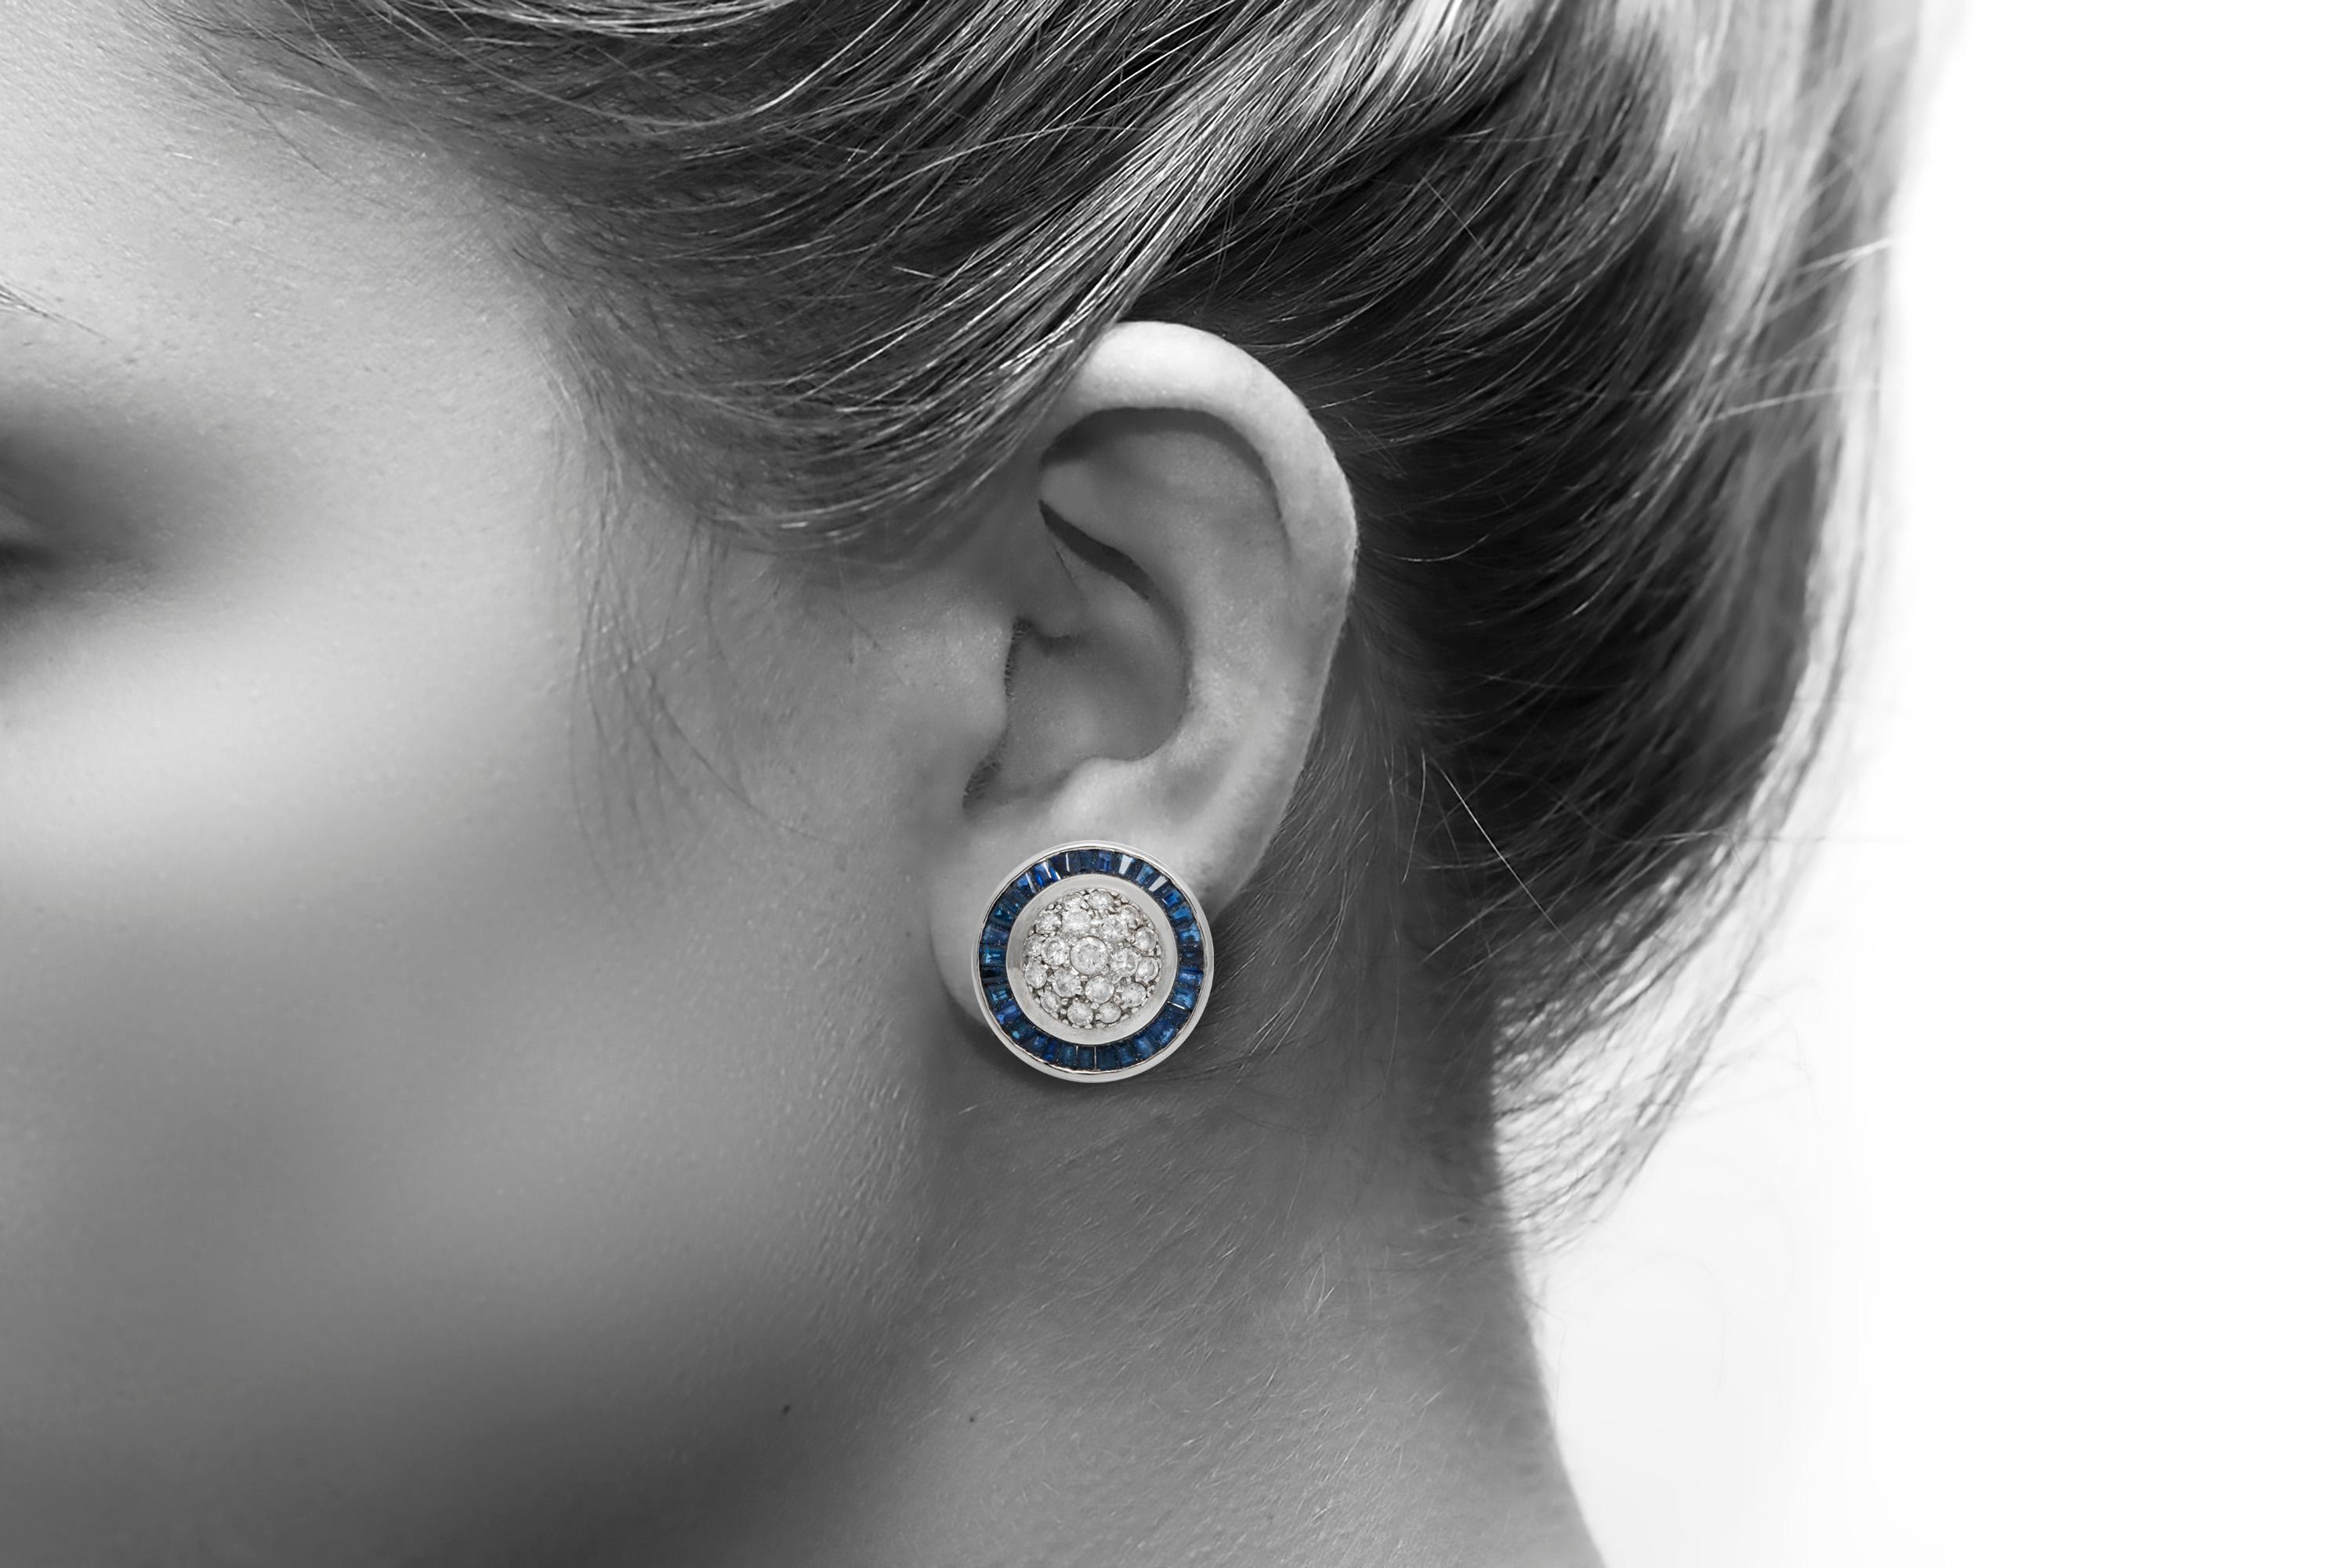 The earrings is finely crafted in 14k white gold with diamonds weighing approximately 1.50 carat and sapphire weighing approximately total of 5.00 carat.
